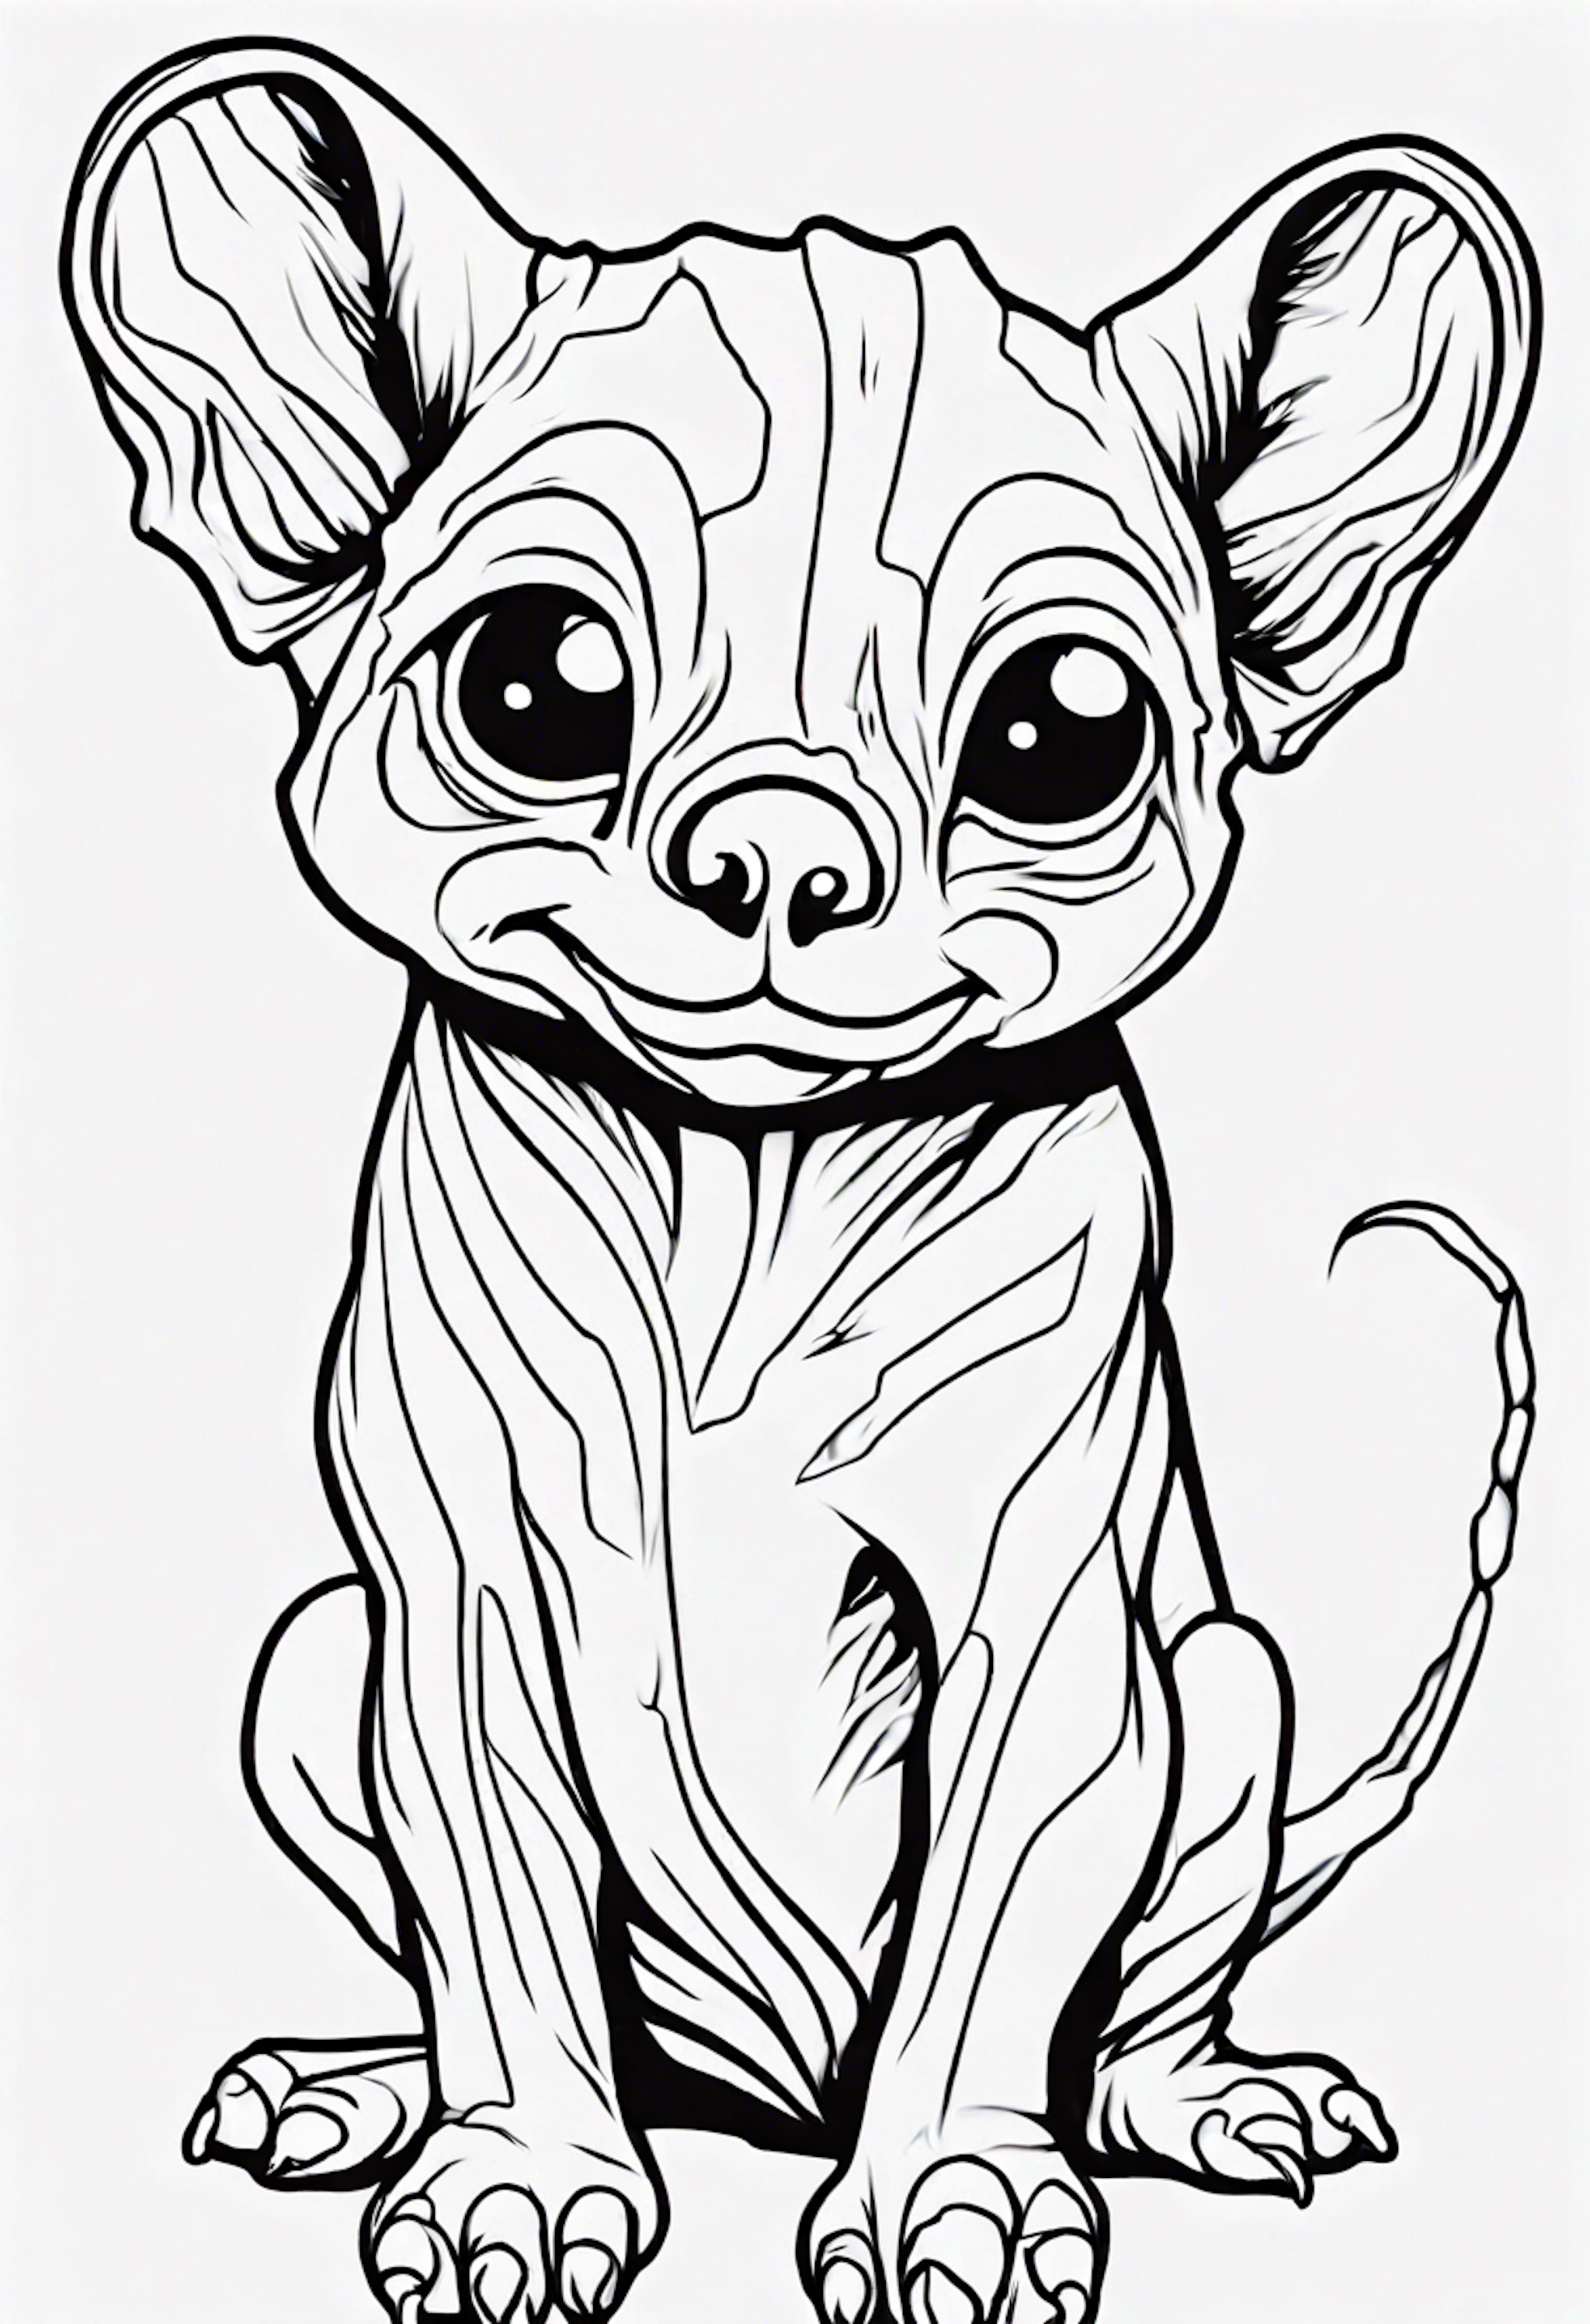 A coloring page for 1 Cute coloring pages